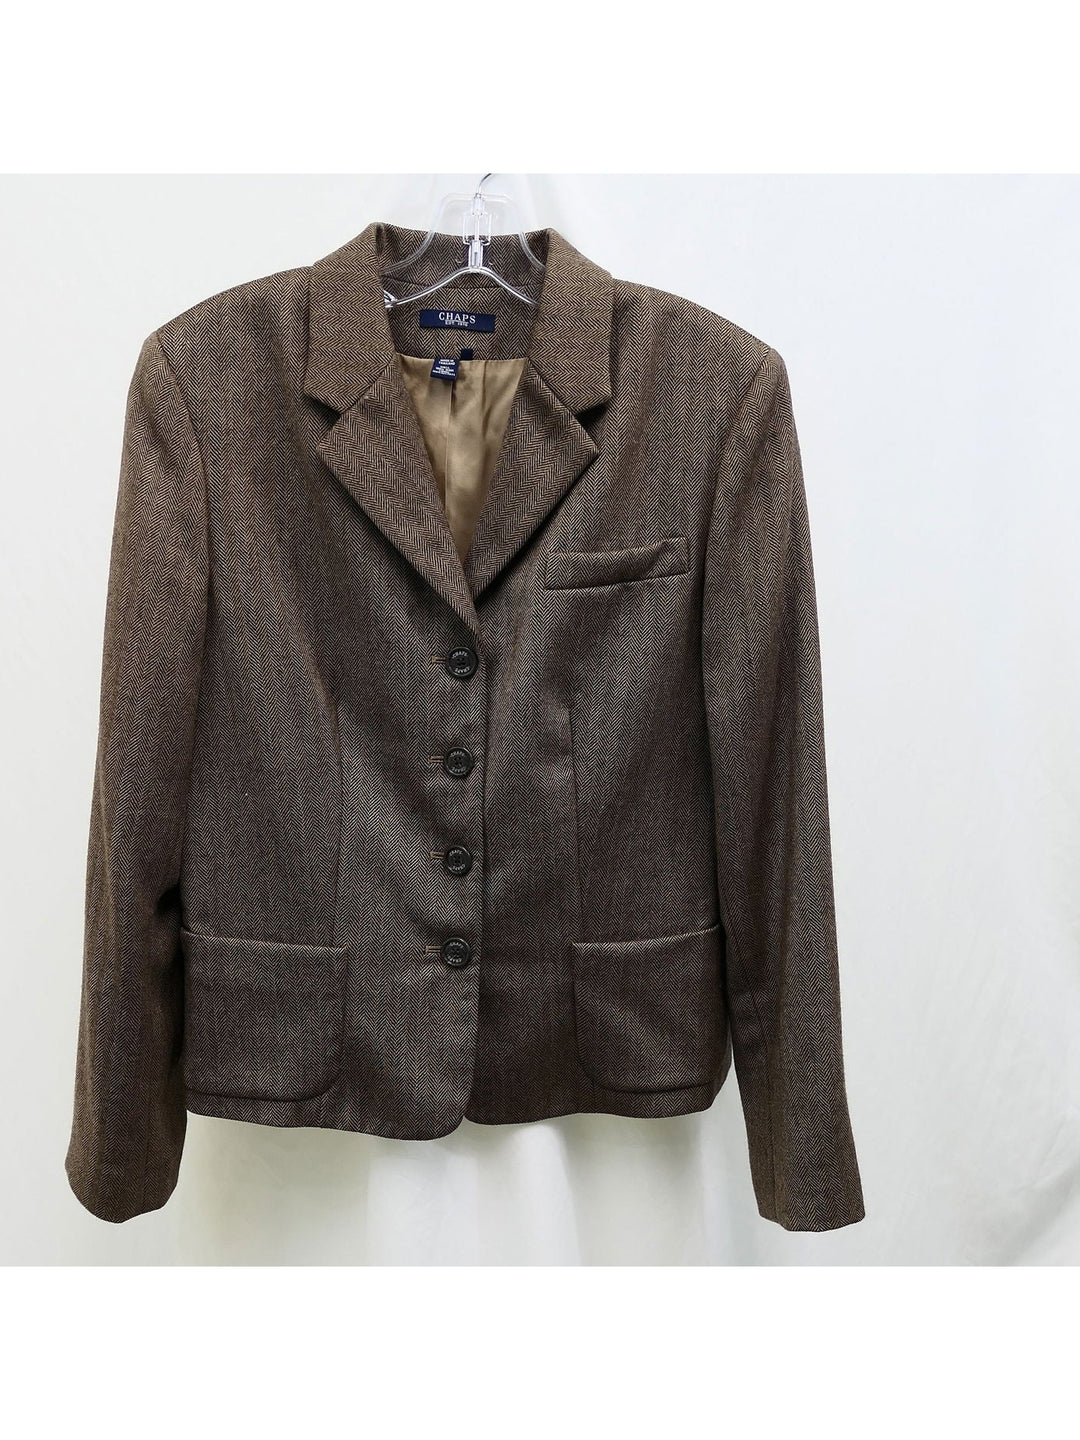 Chaps Brown Blazer - Size 12 - The Kennedy Collective Thrift - 